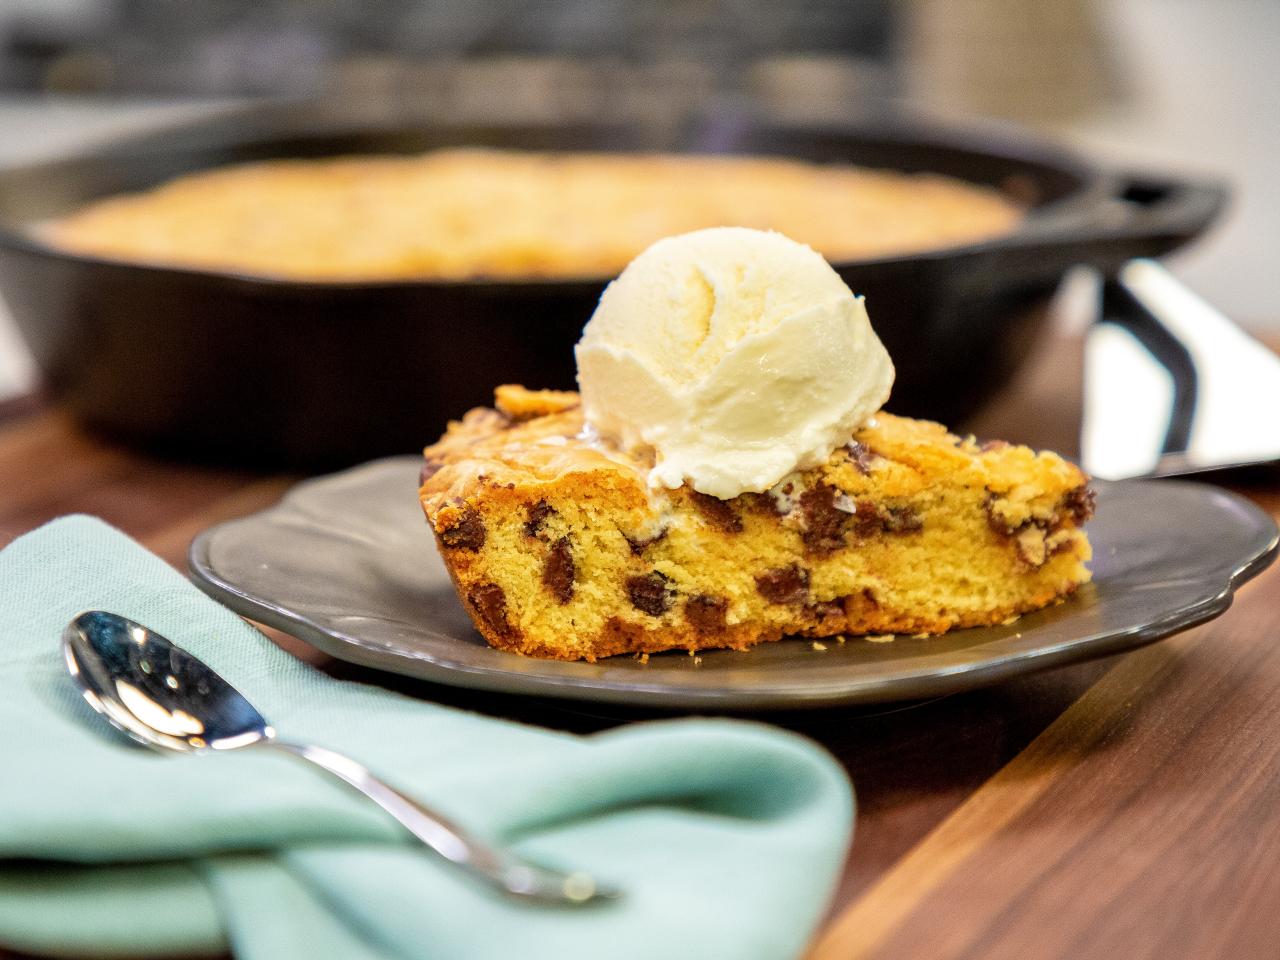 Chili's Copycat Chocolate Chip Skillet Cookie – The Sassy Foodie